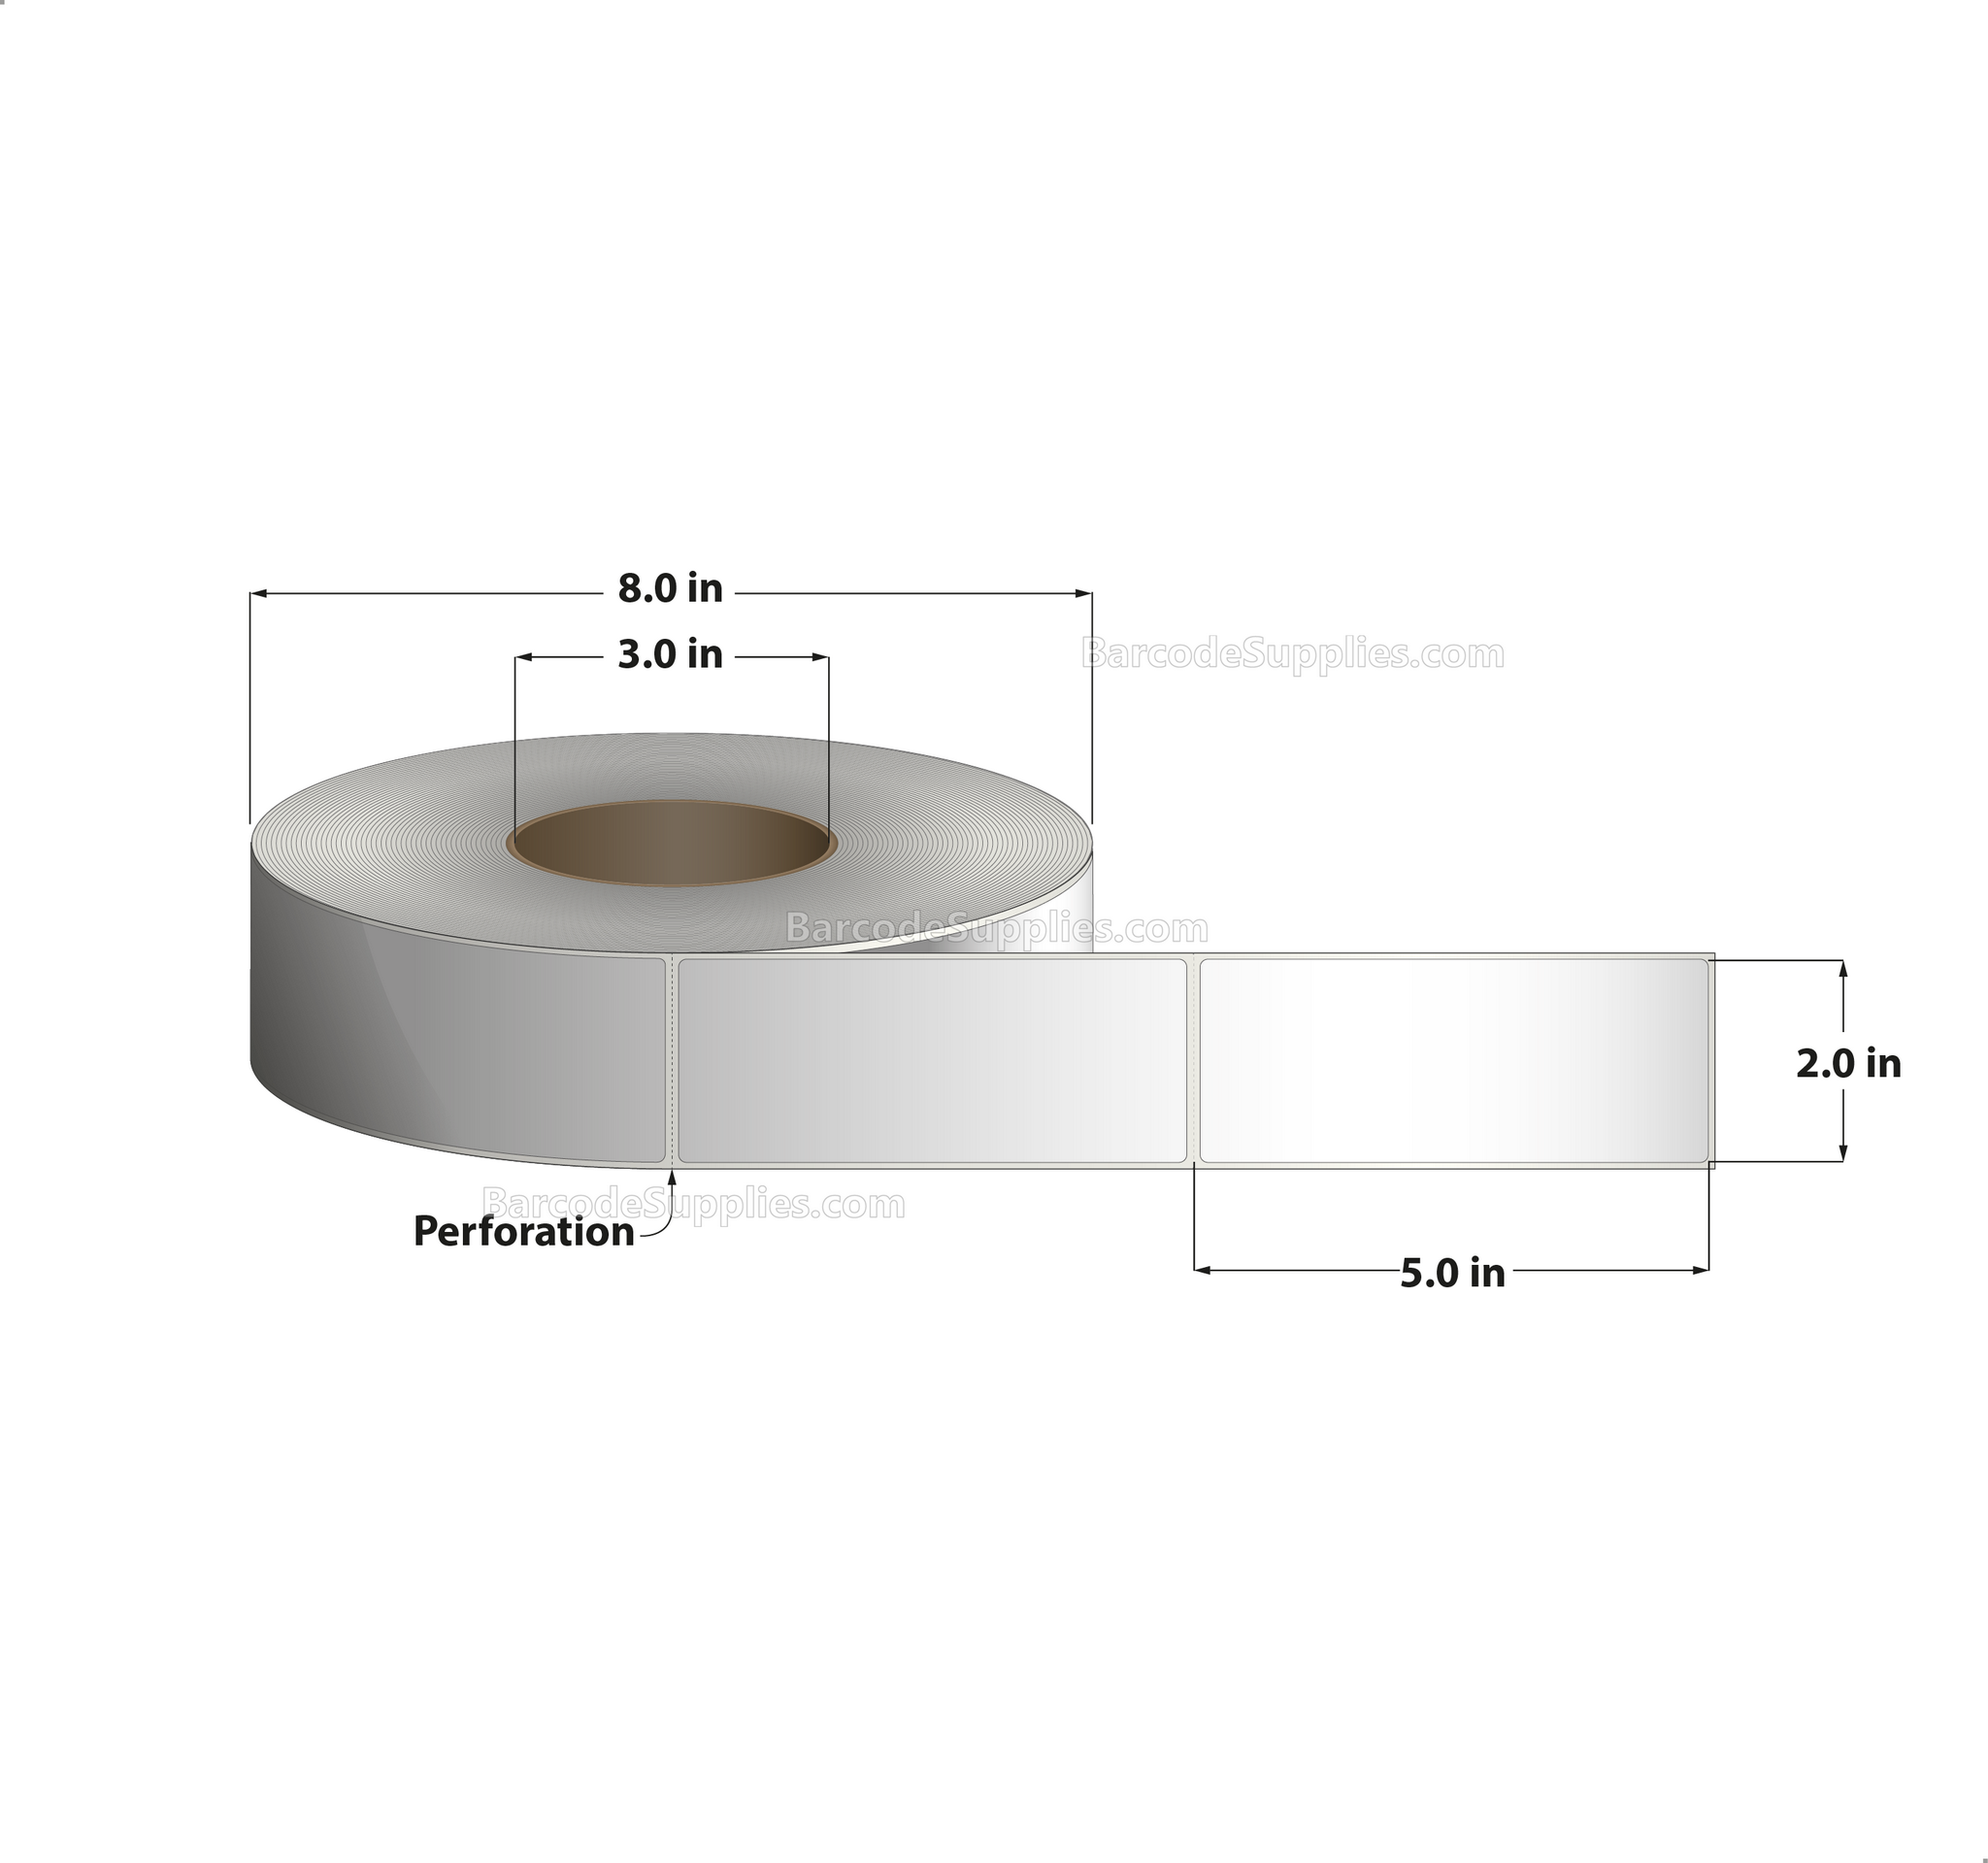 2 x 5 Thermal Transfer White Labels With Permanent Adhesive - Perforated - 1200 Labels Per Roll - Carton Of 8 Rolls - 9600 Labels Total - MPN: RT-2-5-1200-3